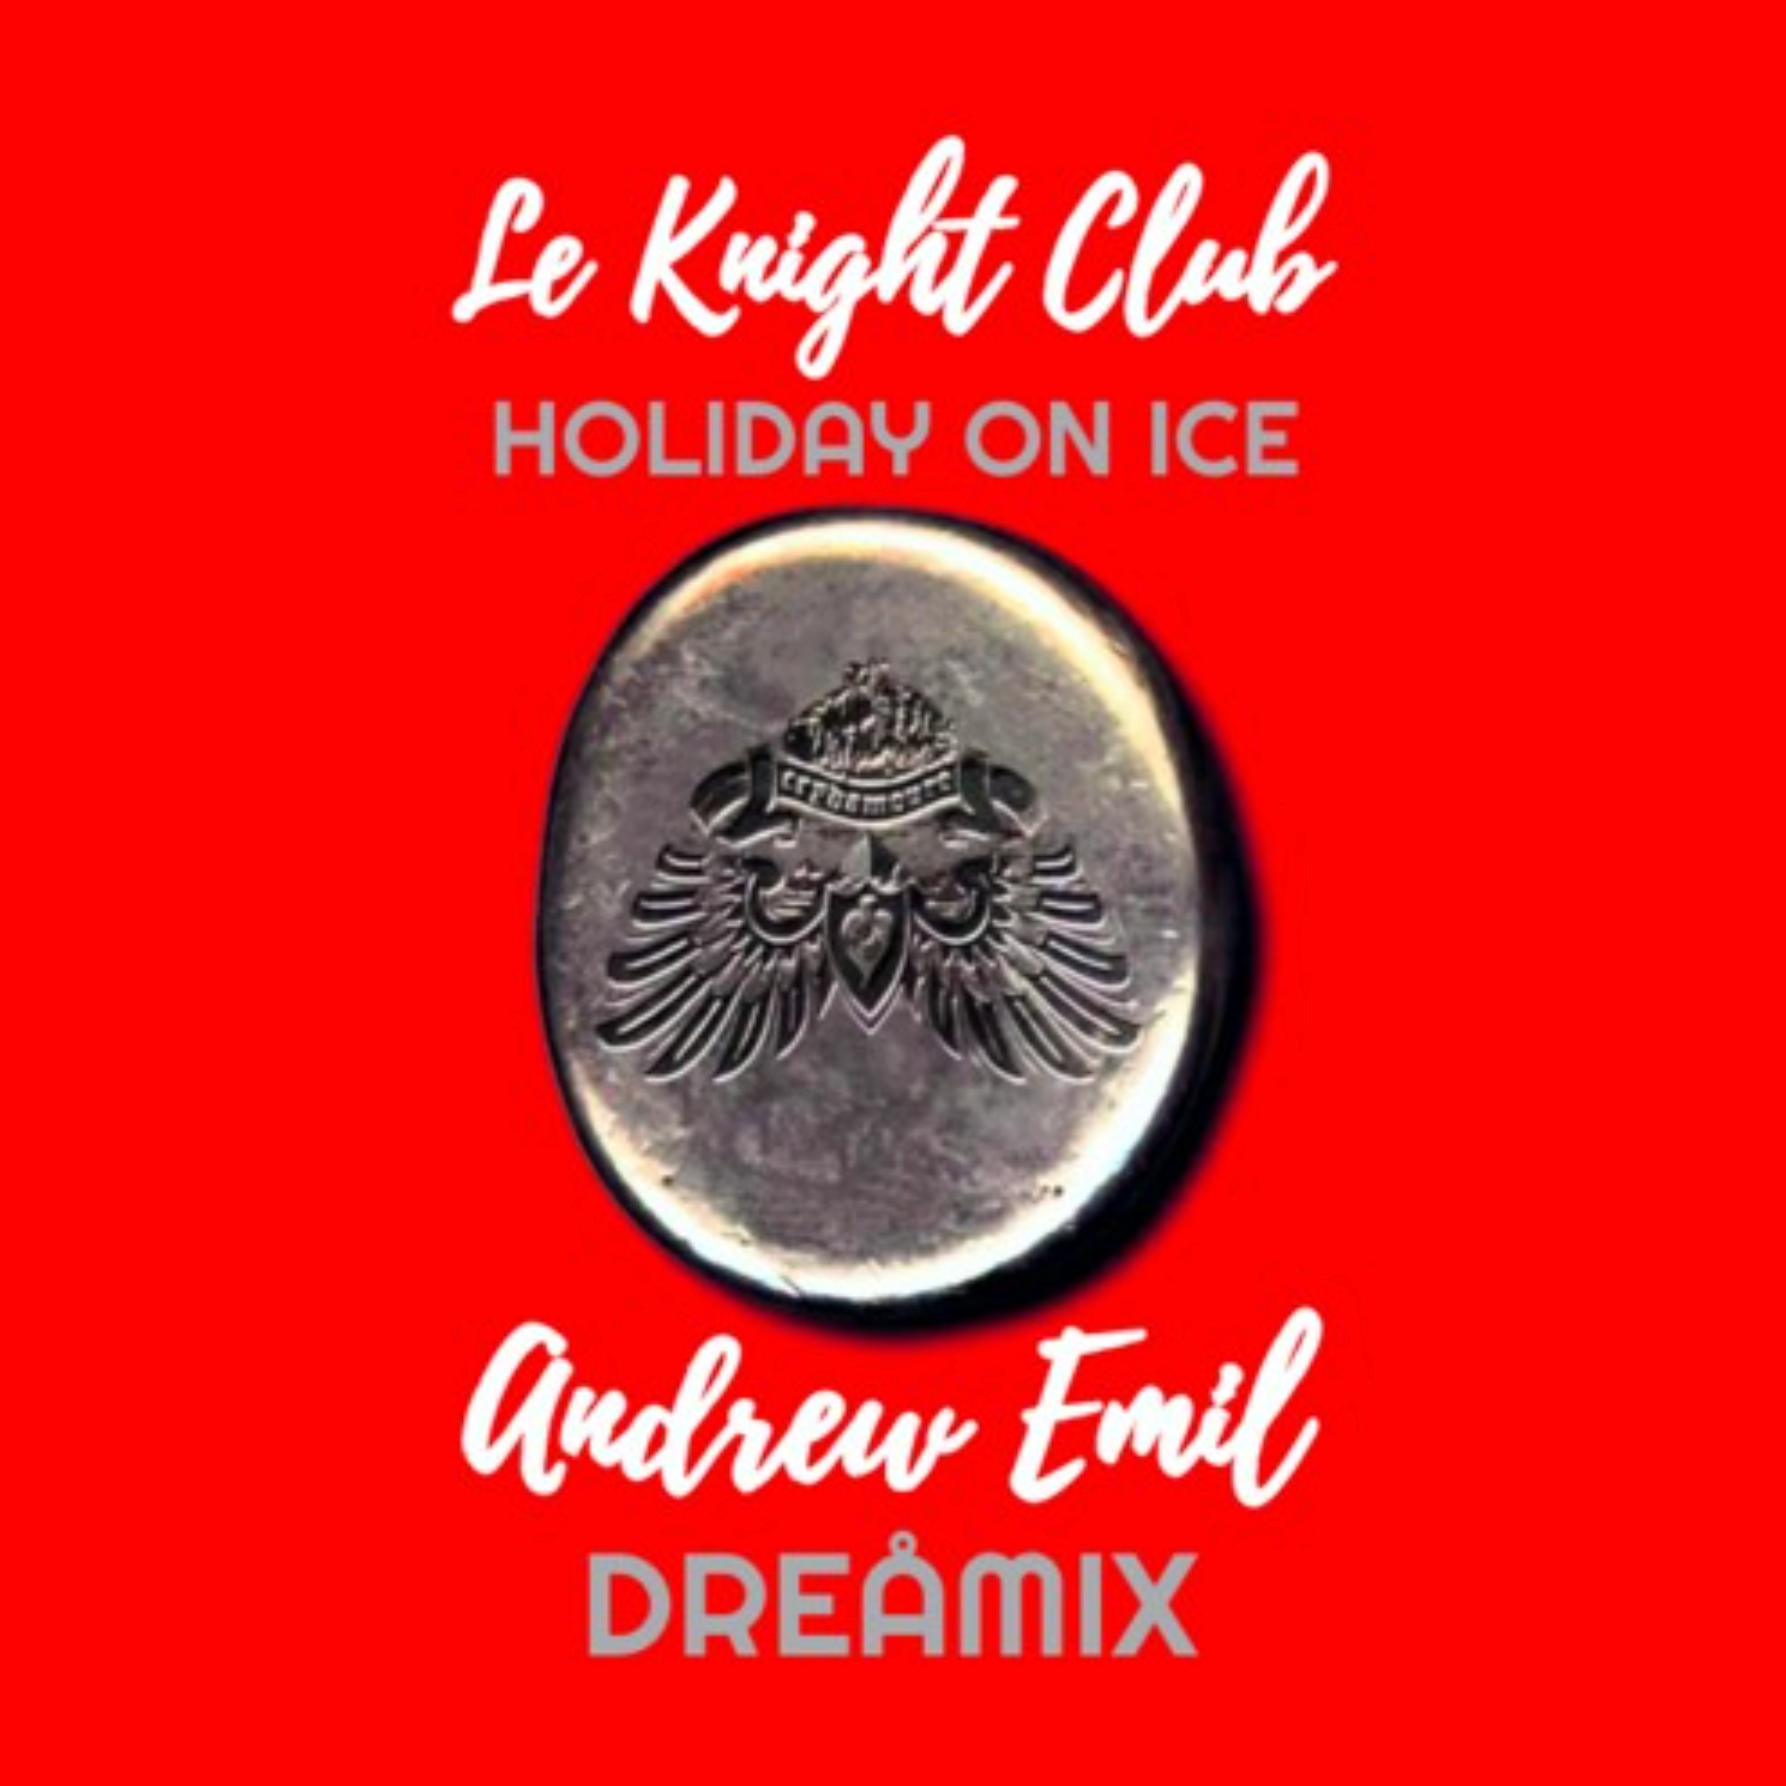 Holiday On Ice (Andrew Emil Dreamix)